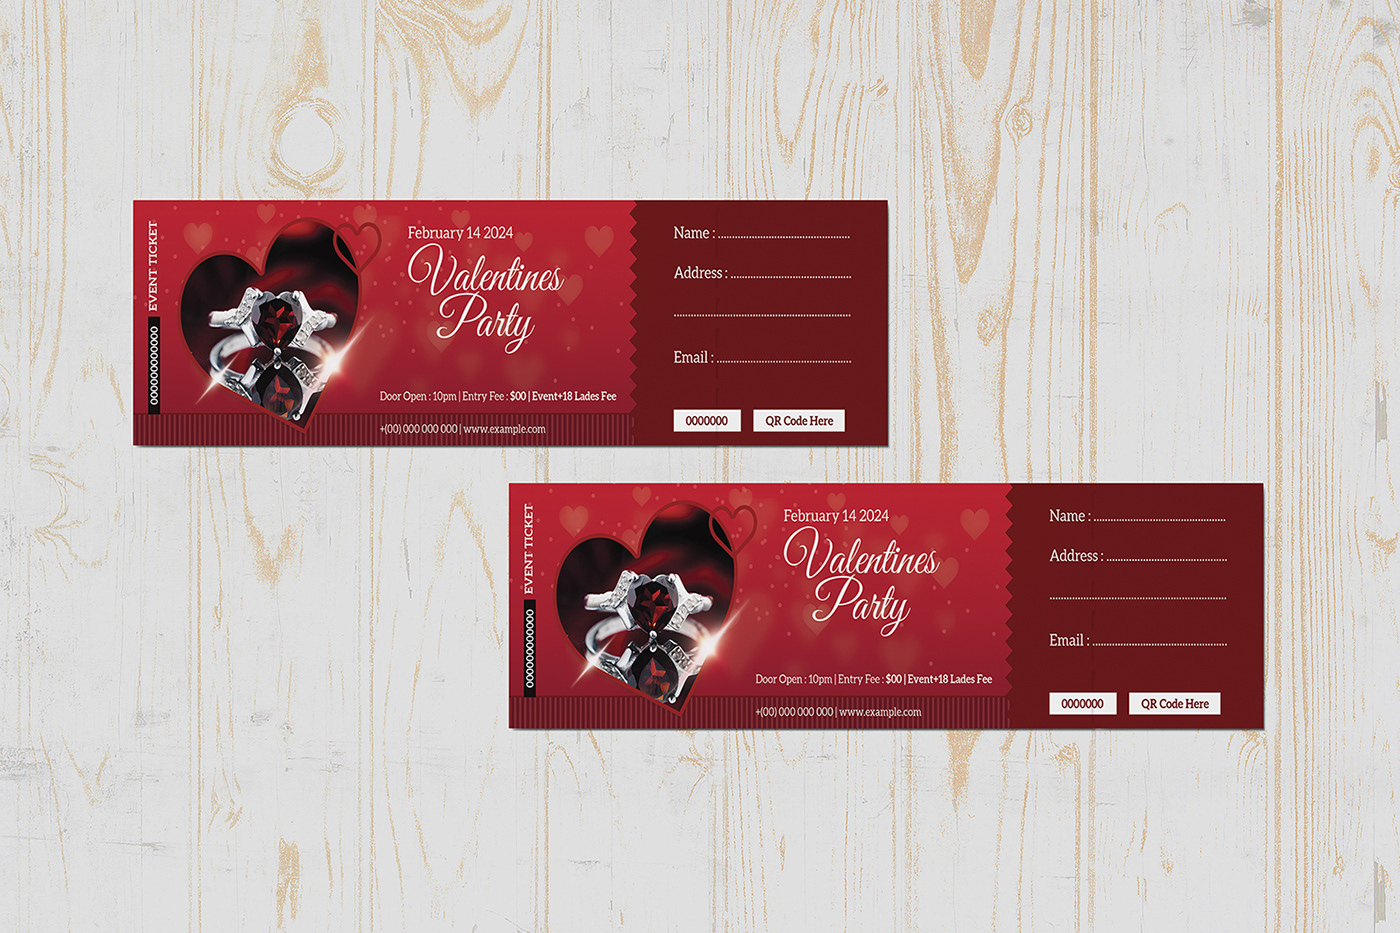 valentines day party ticket event ticket psd club dj muskc party photoshop template ticket template valentine ticket